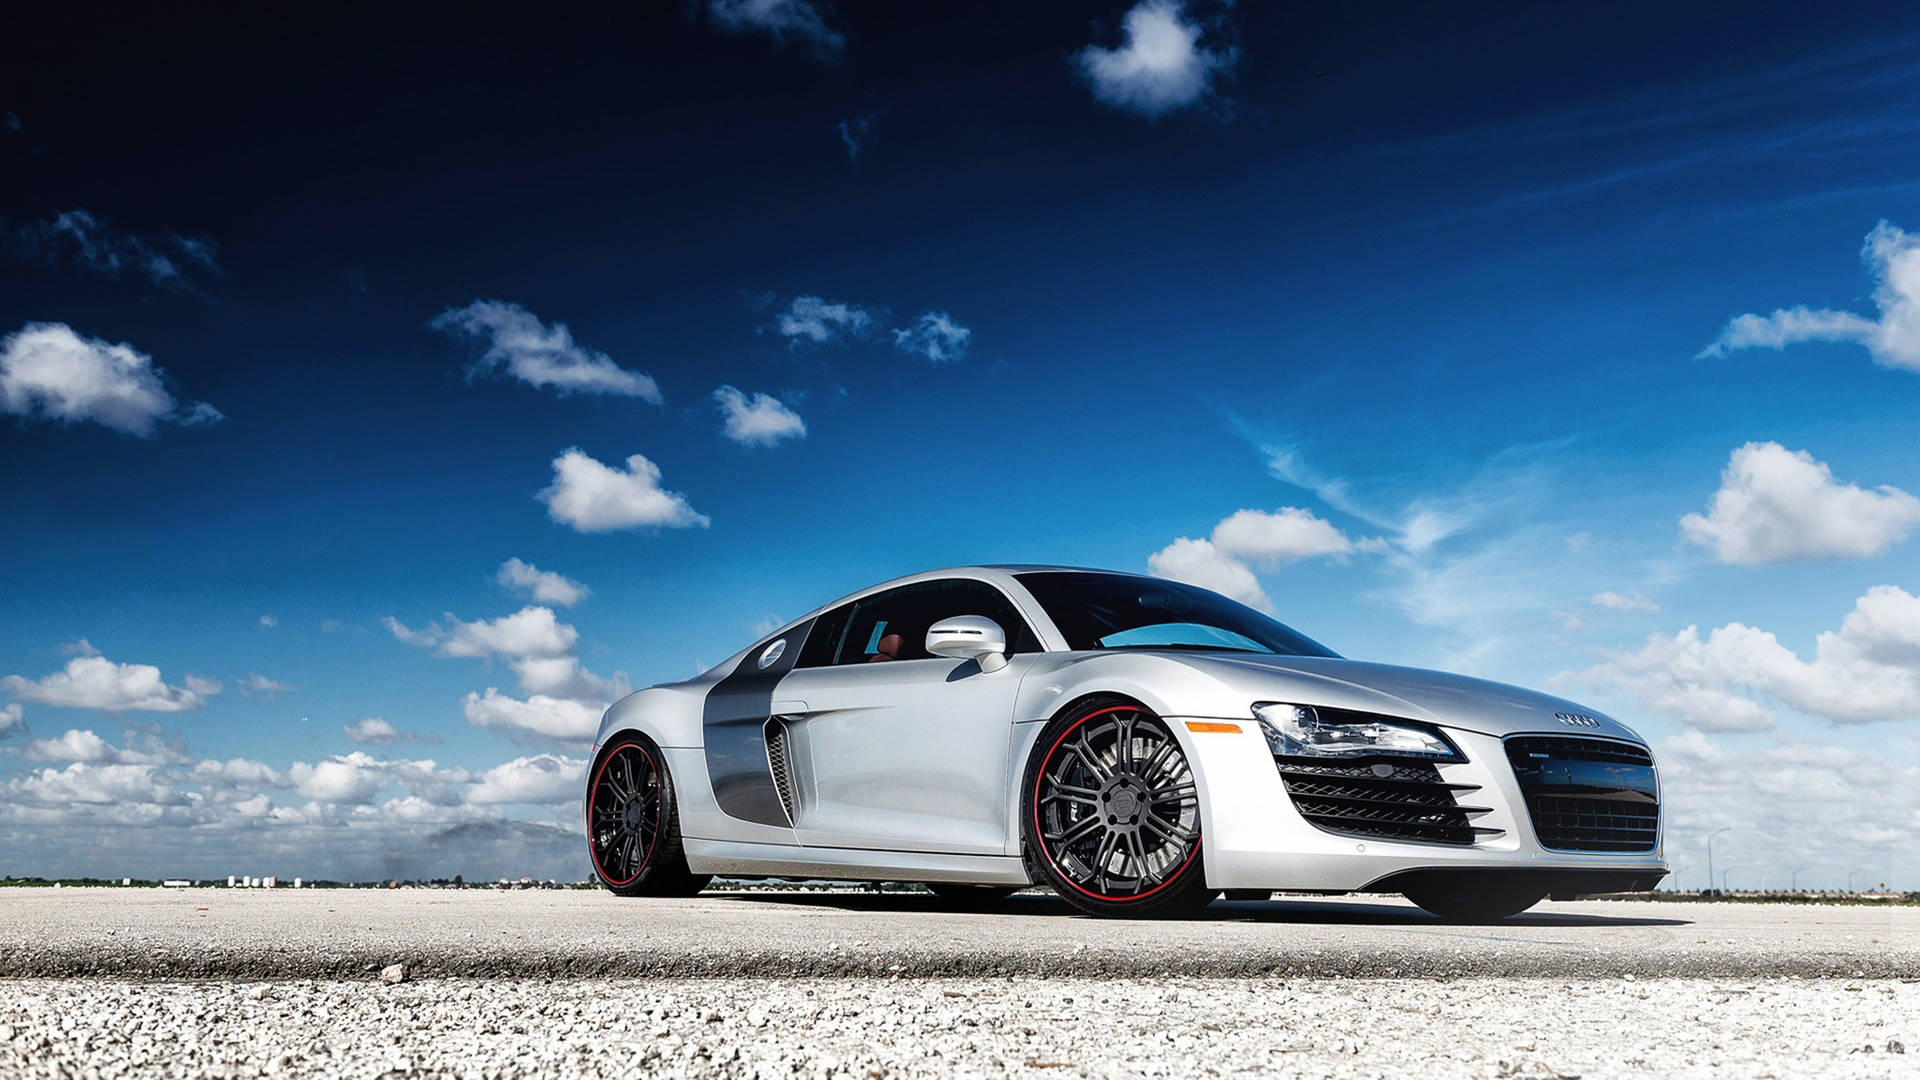 Stunning 2012 Audi R8 – The Embodiment of Cool Cars Wallpaper